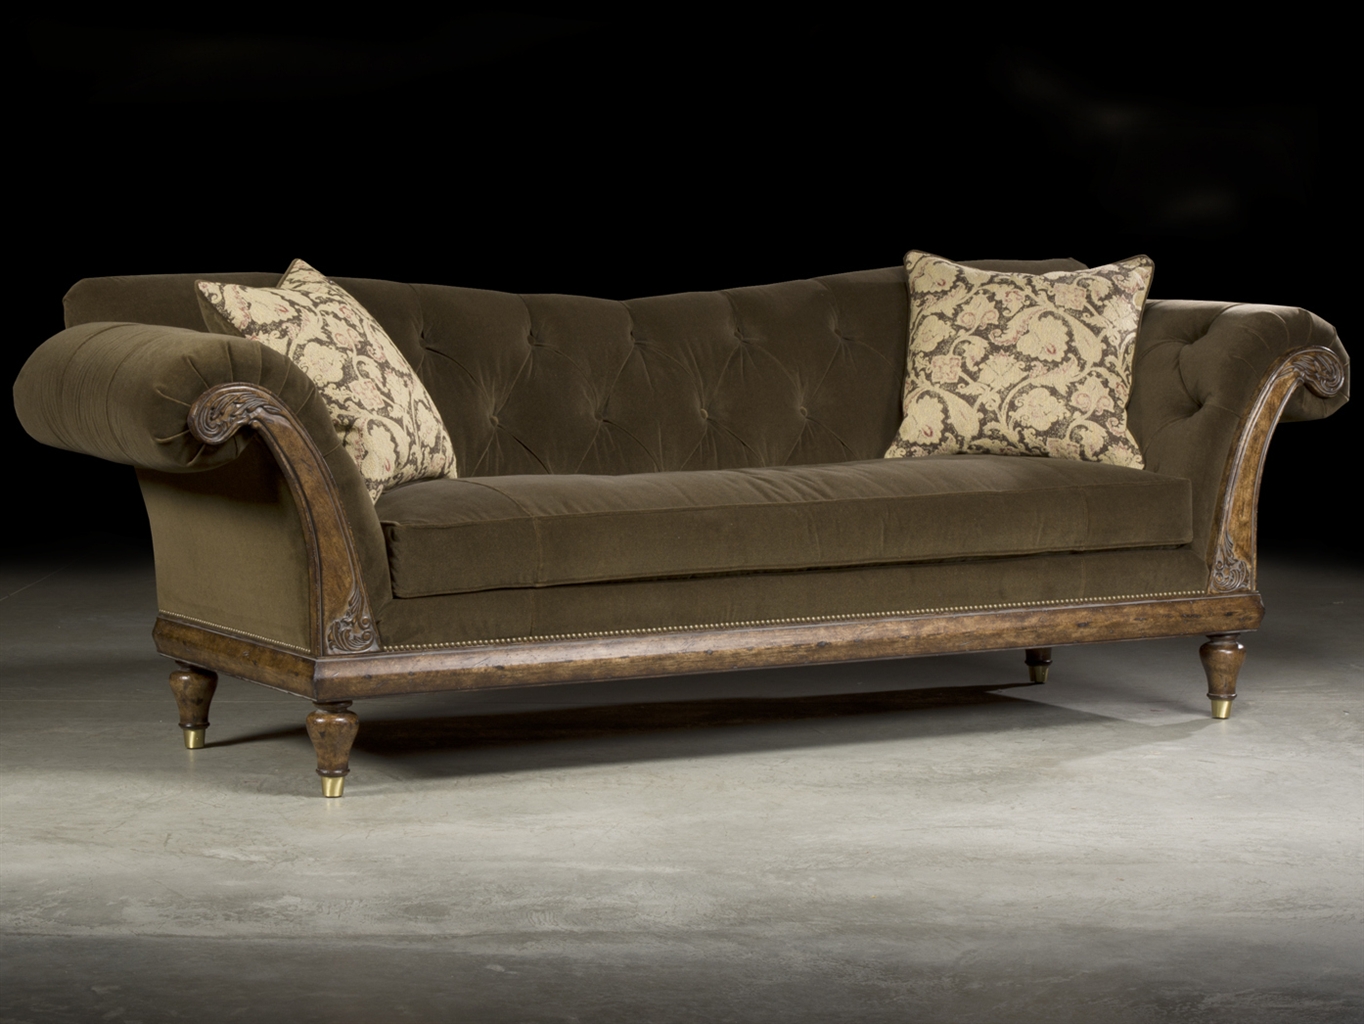 luxurious brown leather sofa and chair